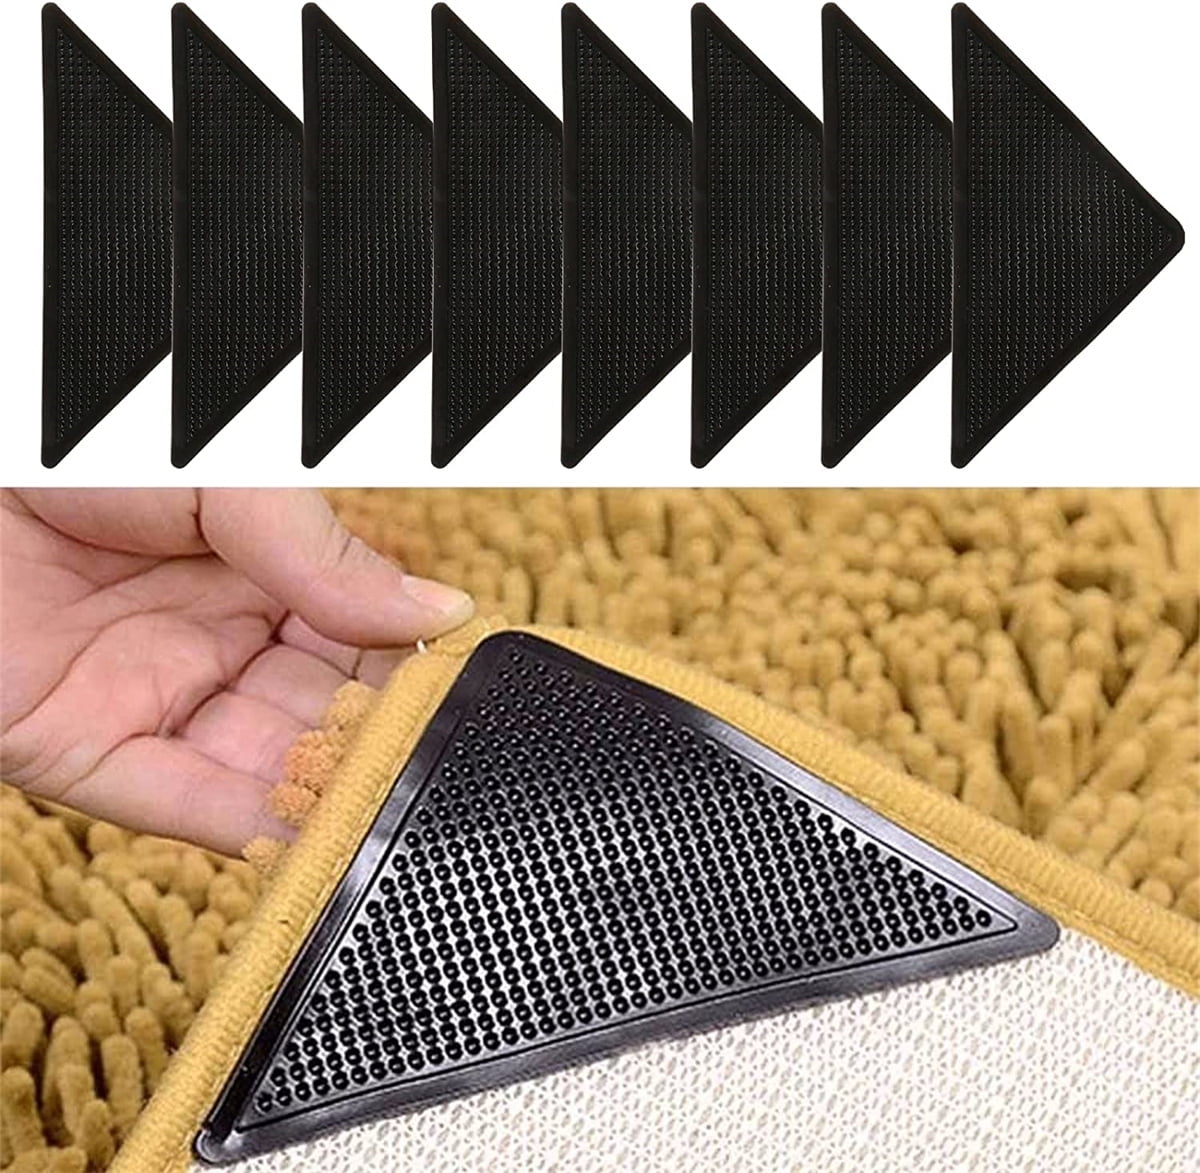 Ledg Rug Pad Grippers for Area Rugs - Pack of 25 Reusable, No Skid,  Washable, Anti-Slip, Rug Pad Gripper for Hardwood Floors and Tile with